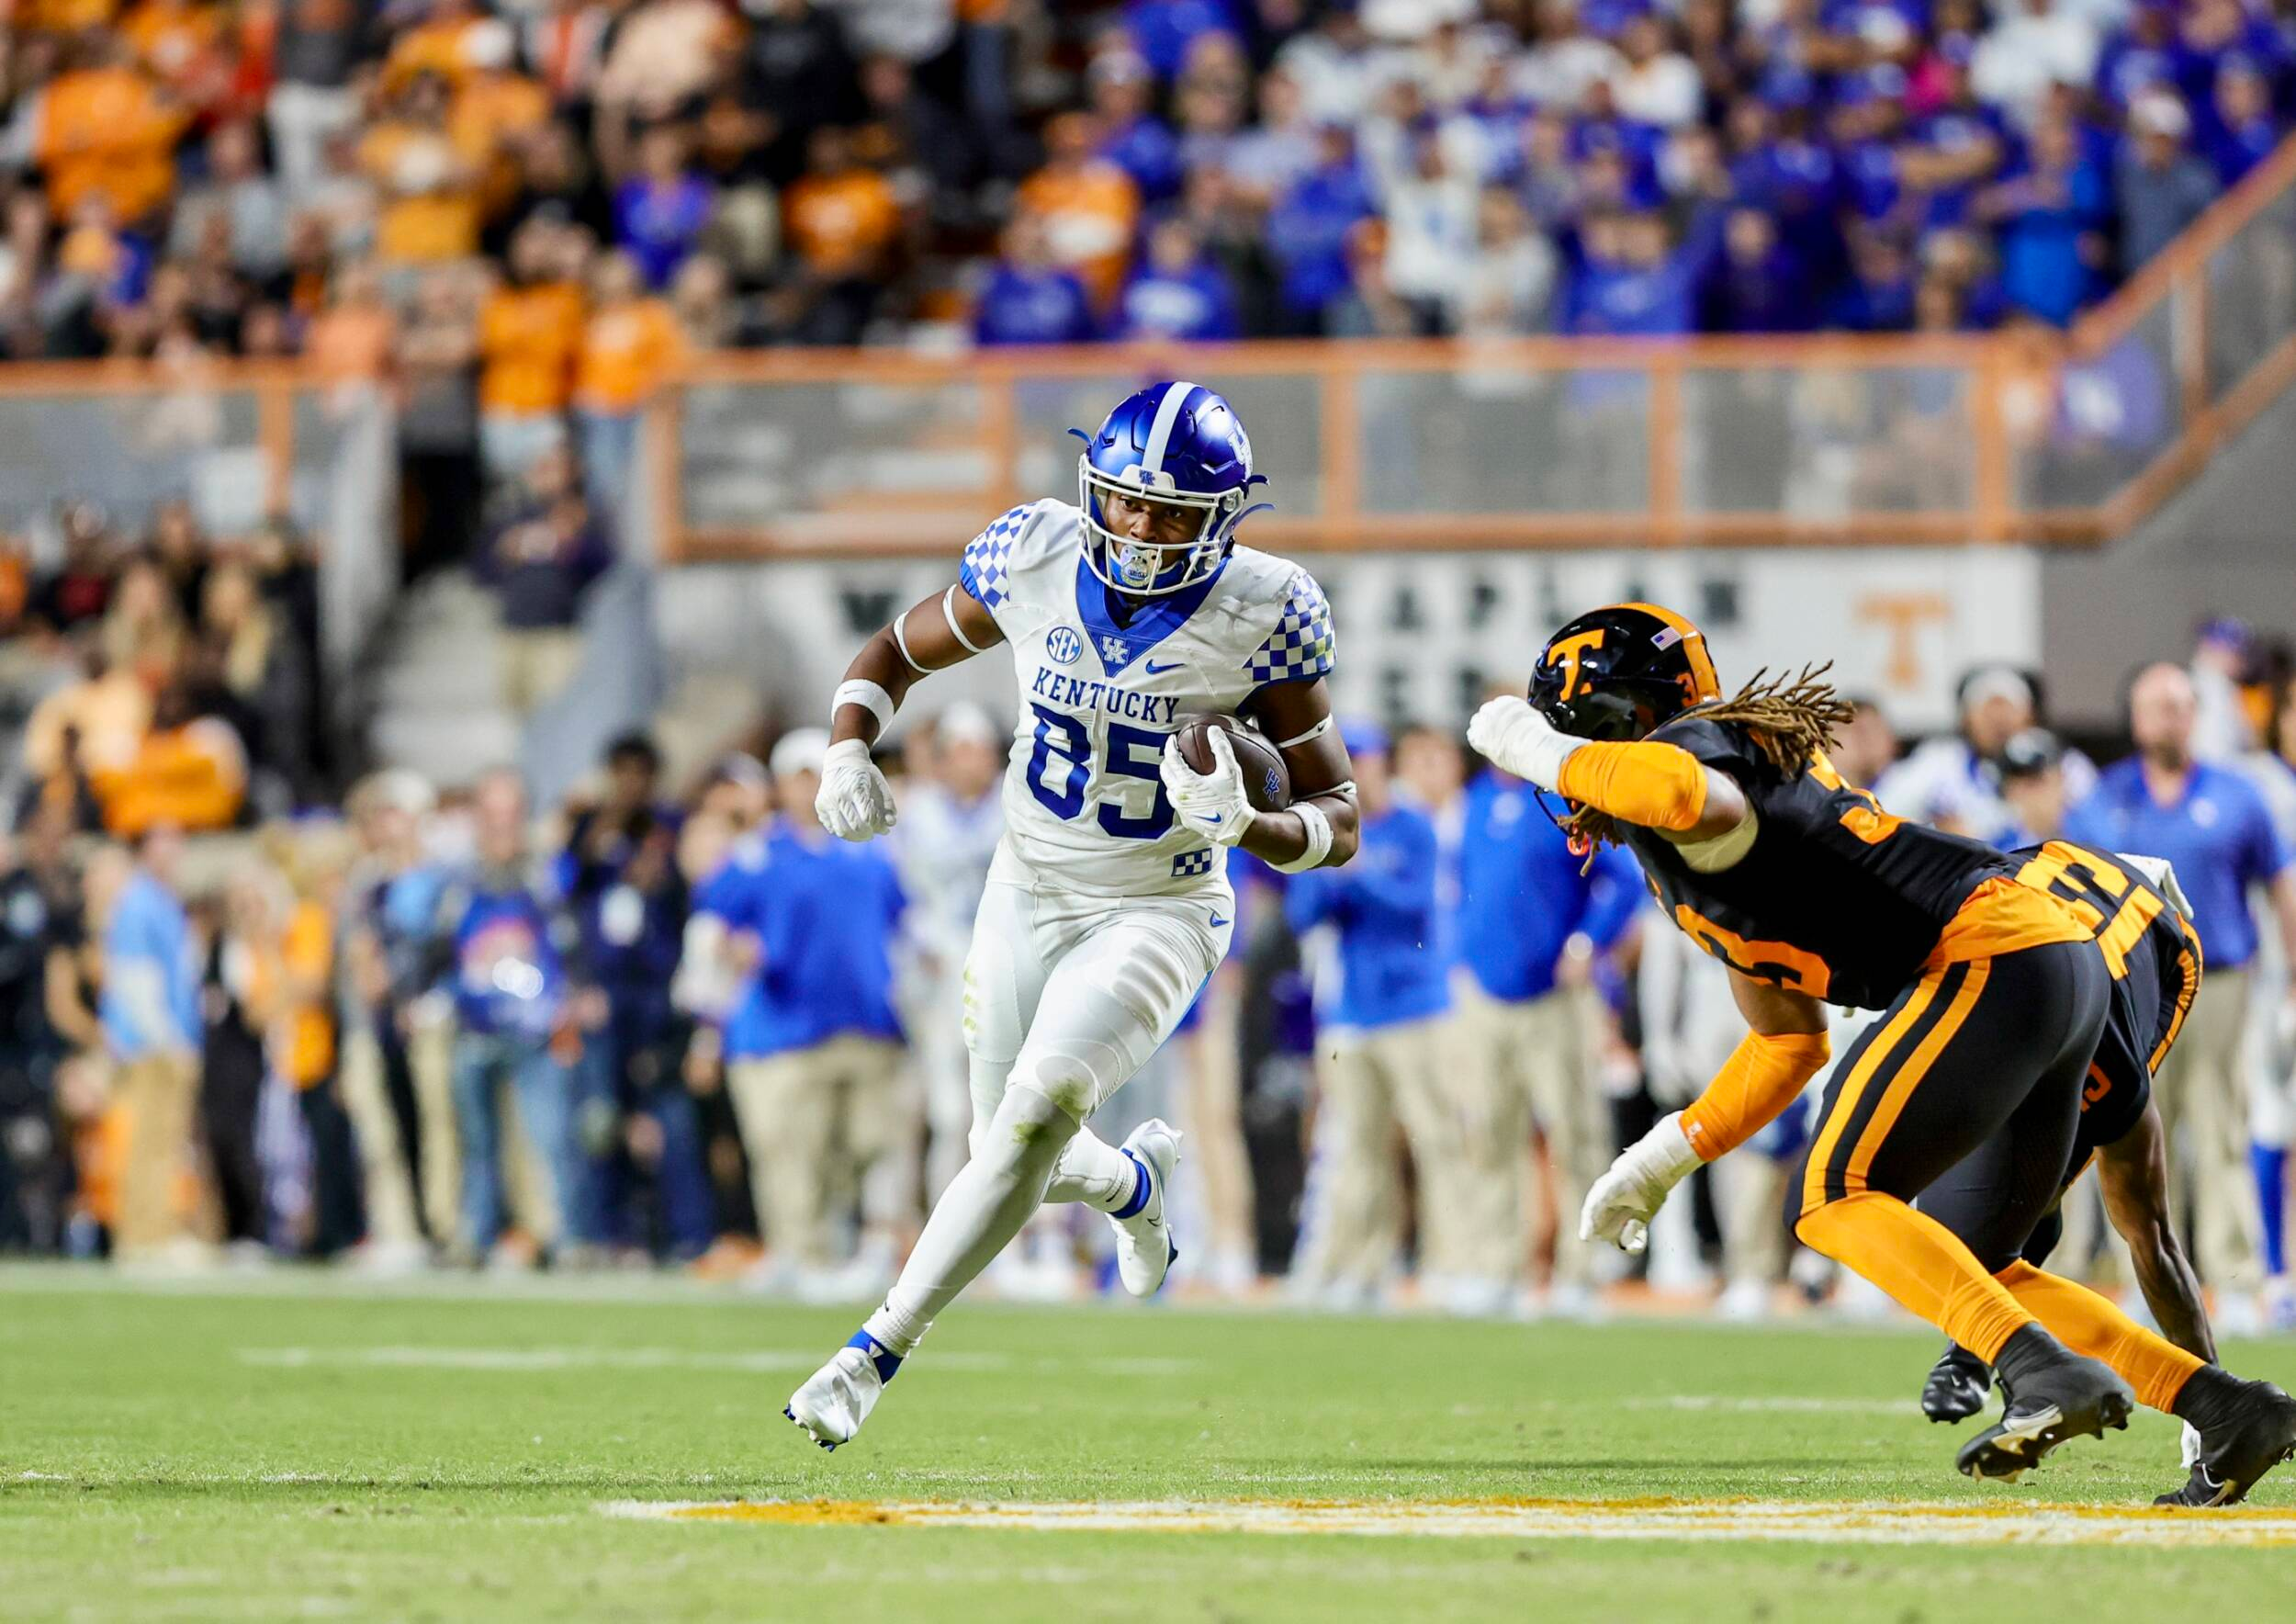 Game Day Central: Kentucky at Tennessee